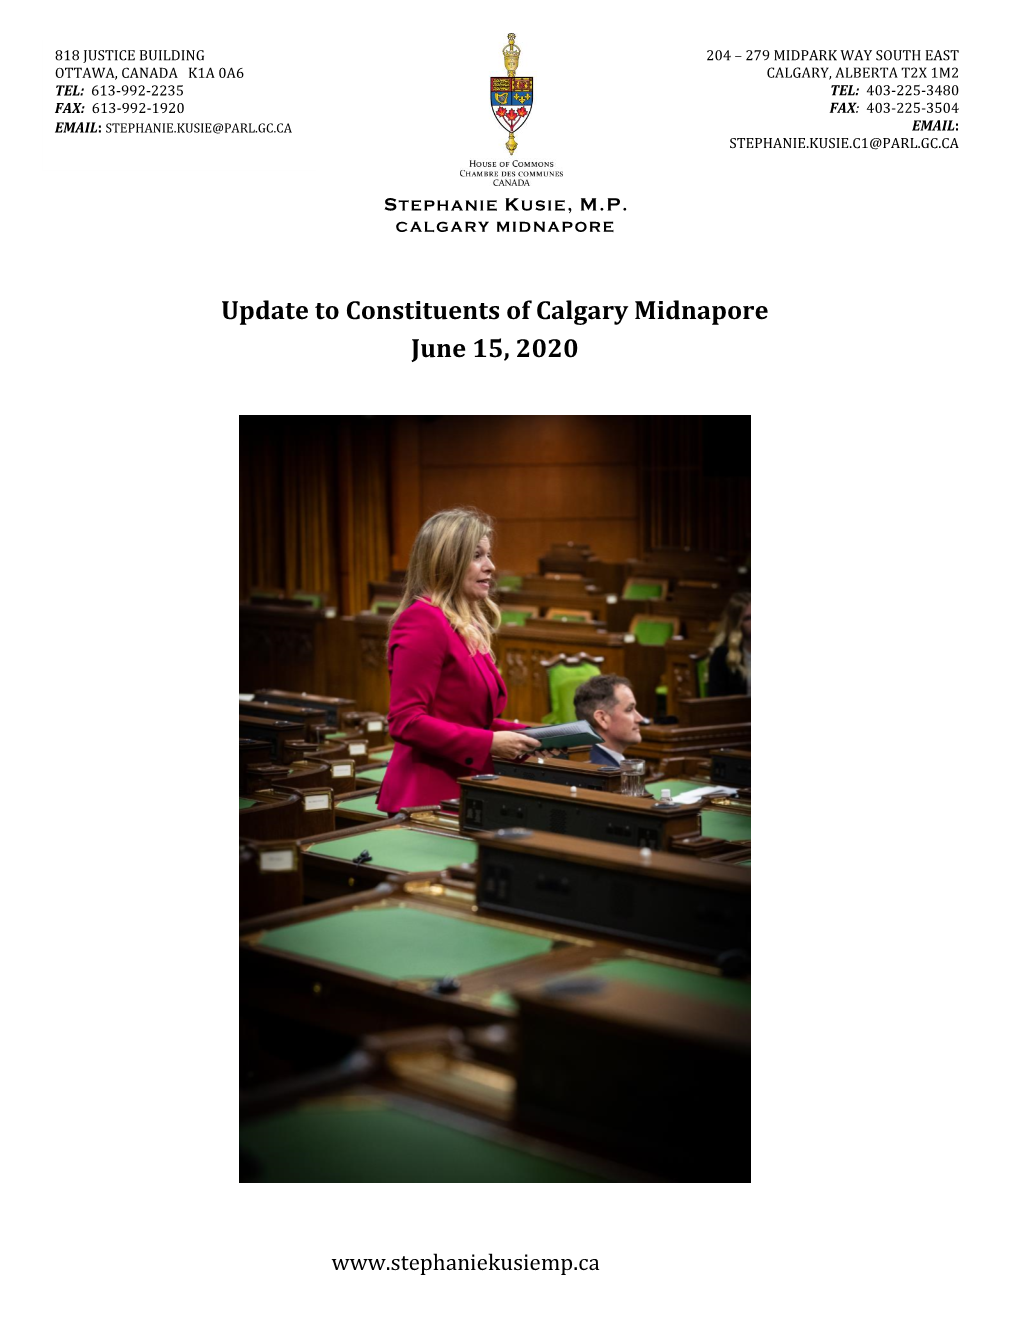 Update to Constituents of Calgary Midnapore June 15, 2020